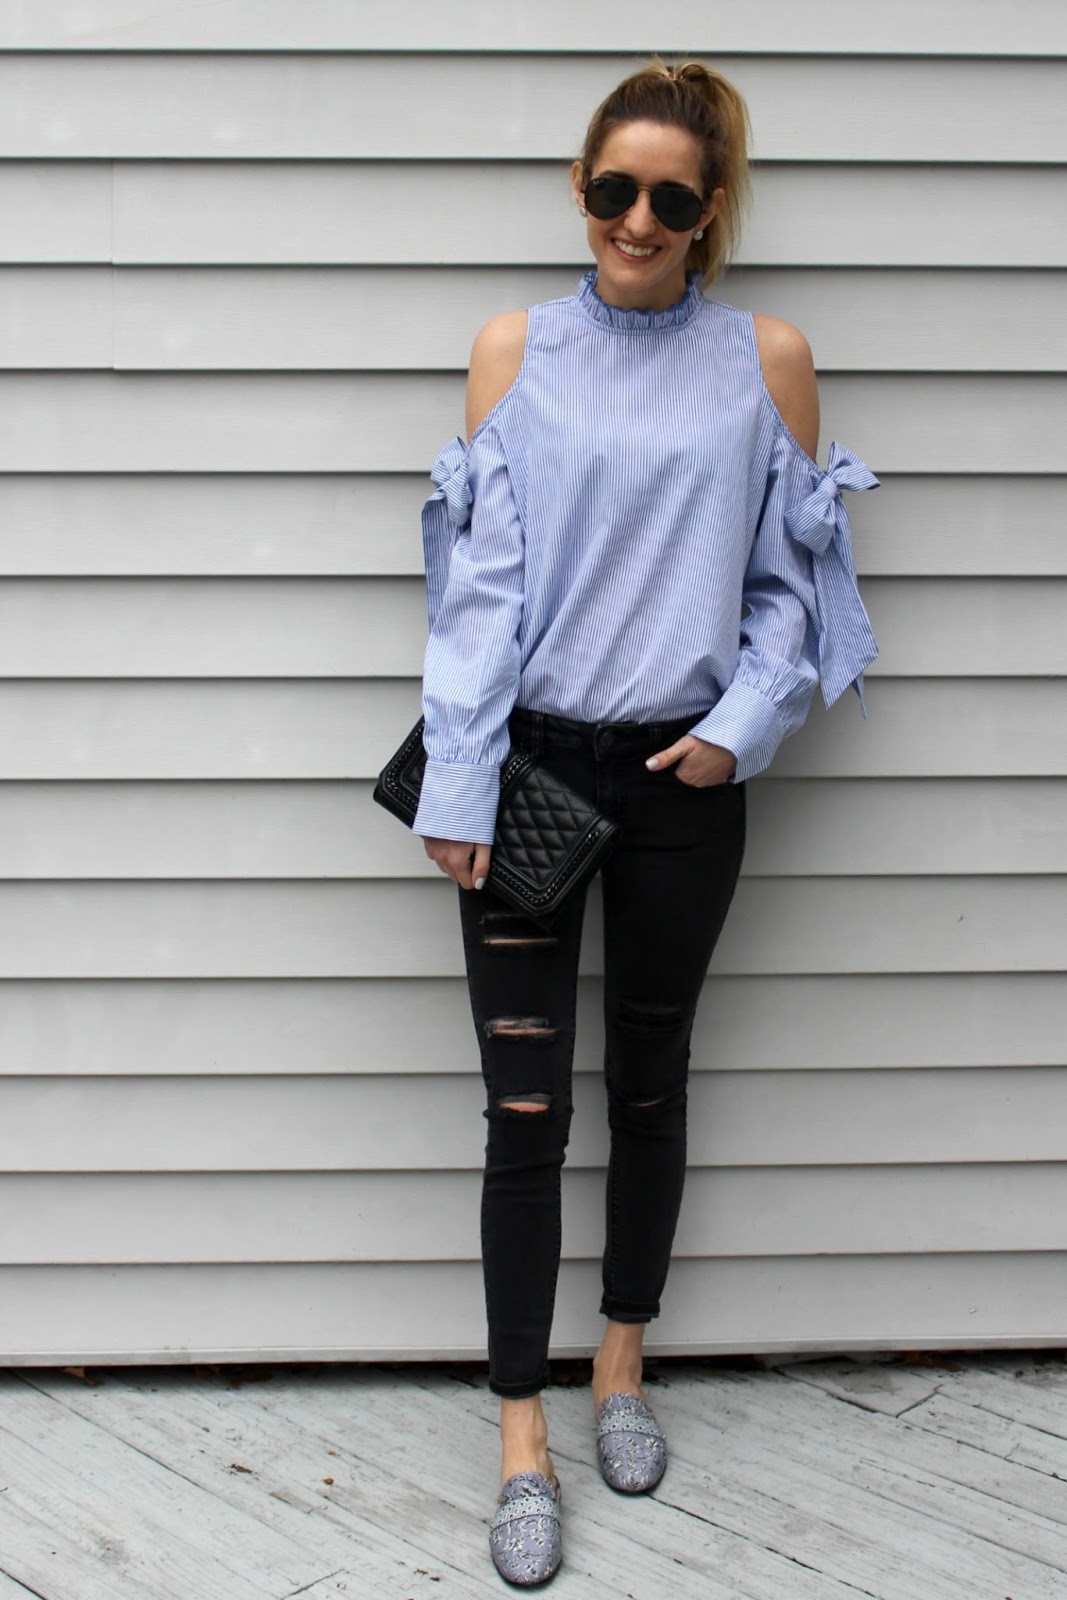 Michelle's Pa(i)ge | Fashion Blogger based in New York: SHOE STYLES TO ...